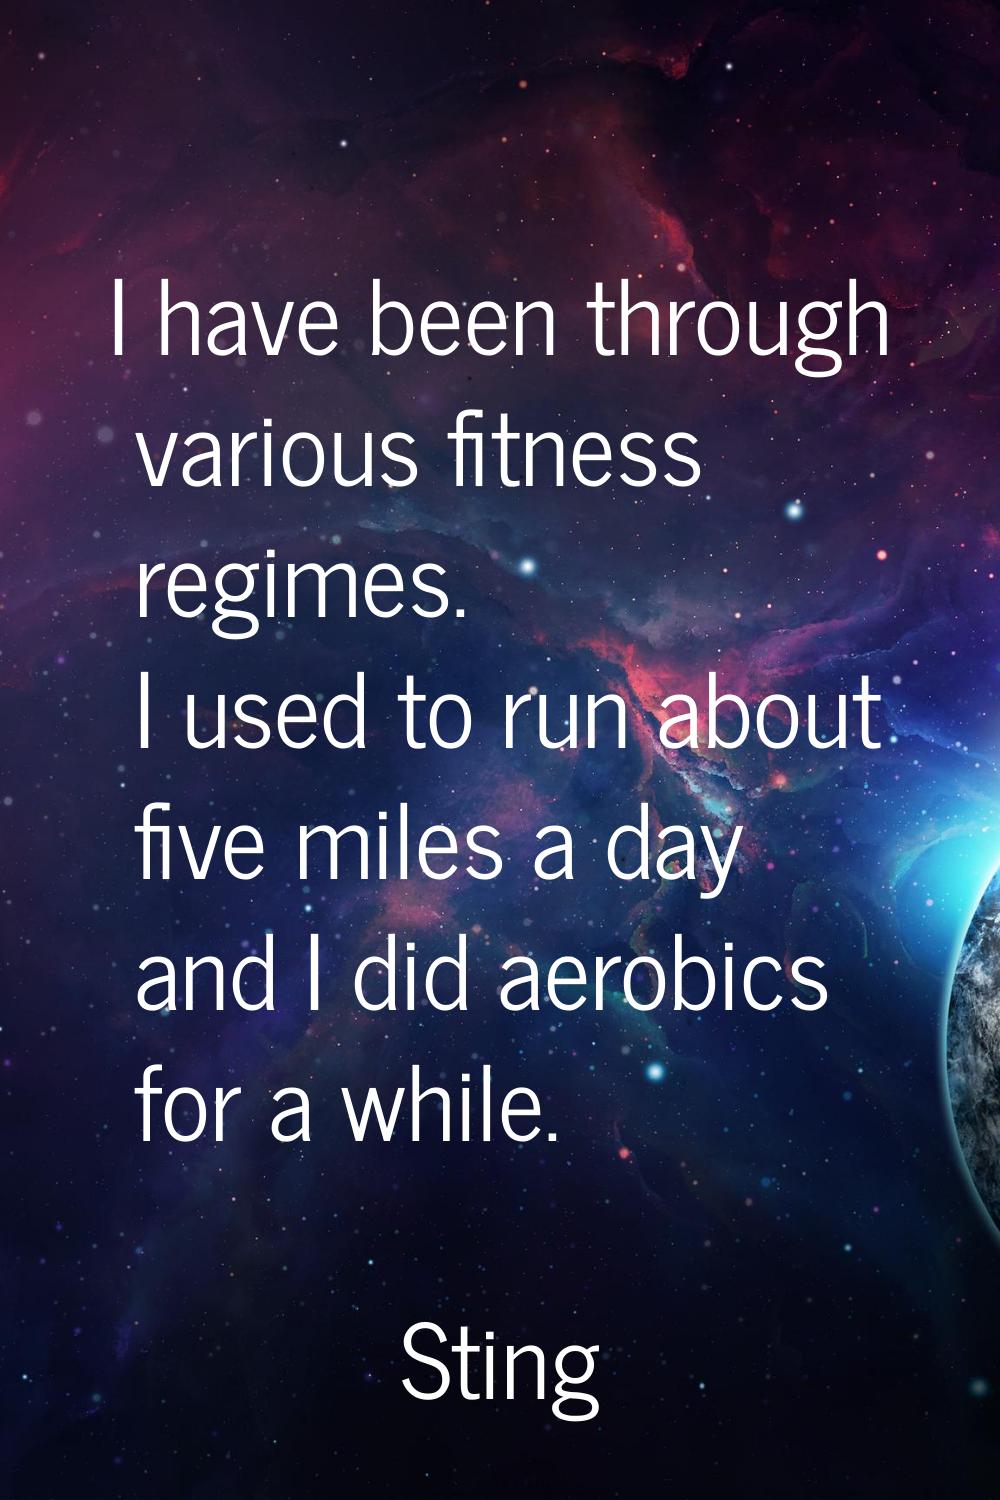 I have been through various fitness regimes. I used to run about five miles a day and I did aerobic